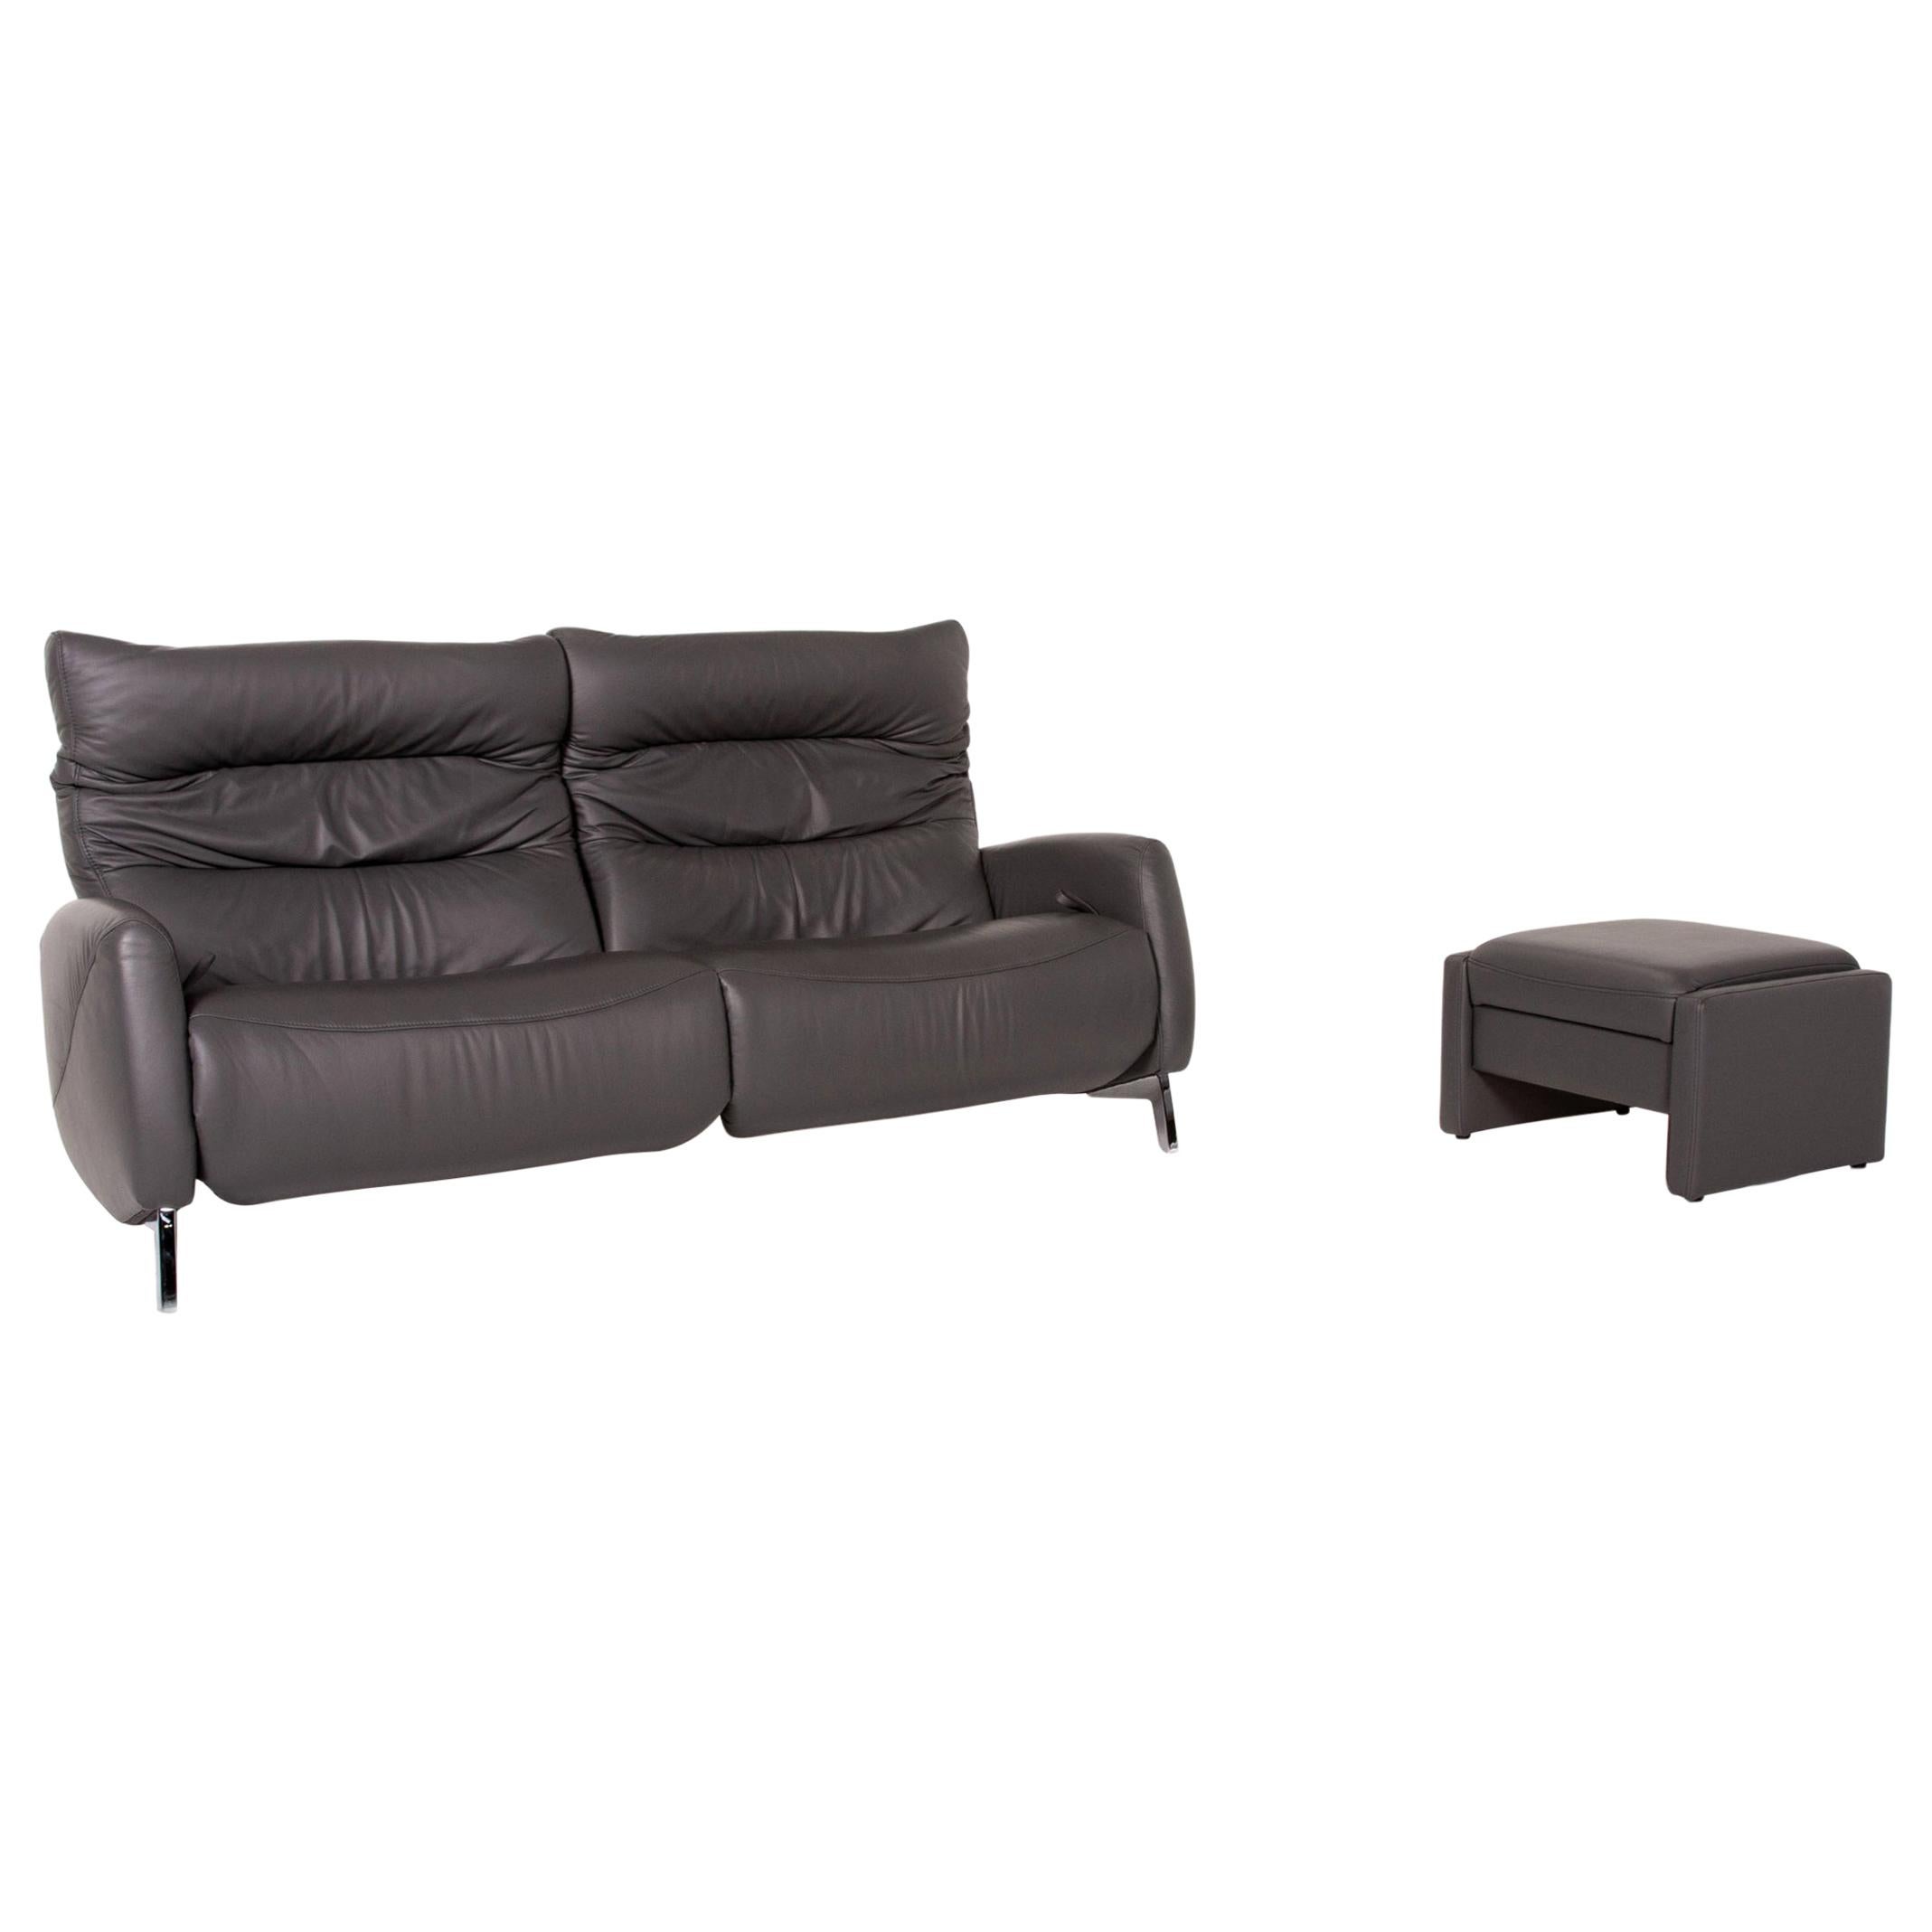 Mondo Recero Leather Sofa Gray Two-Seat Function Relax Function Couch